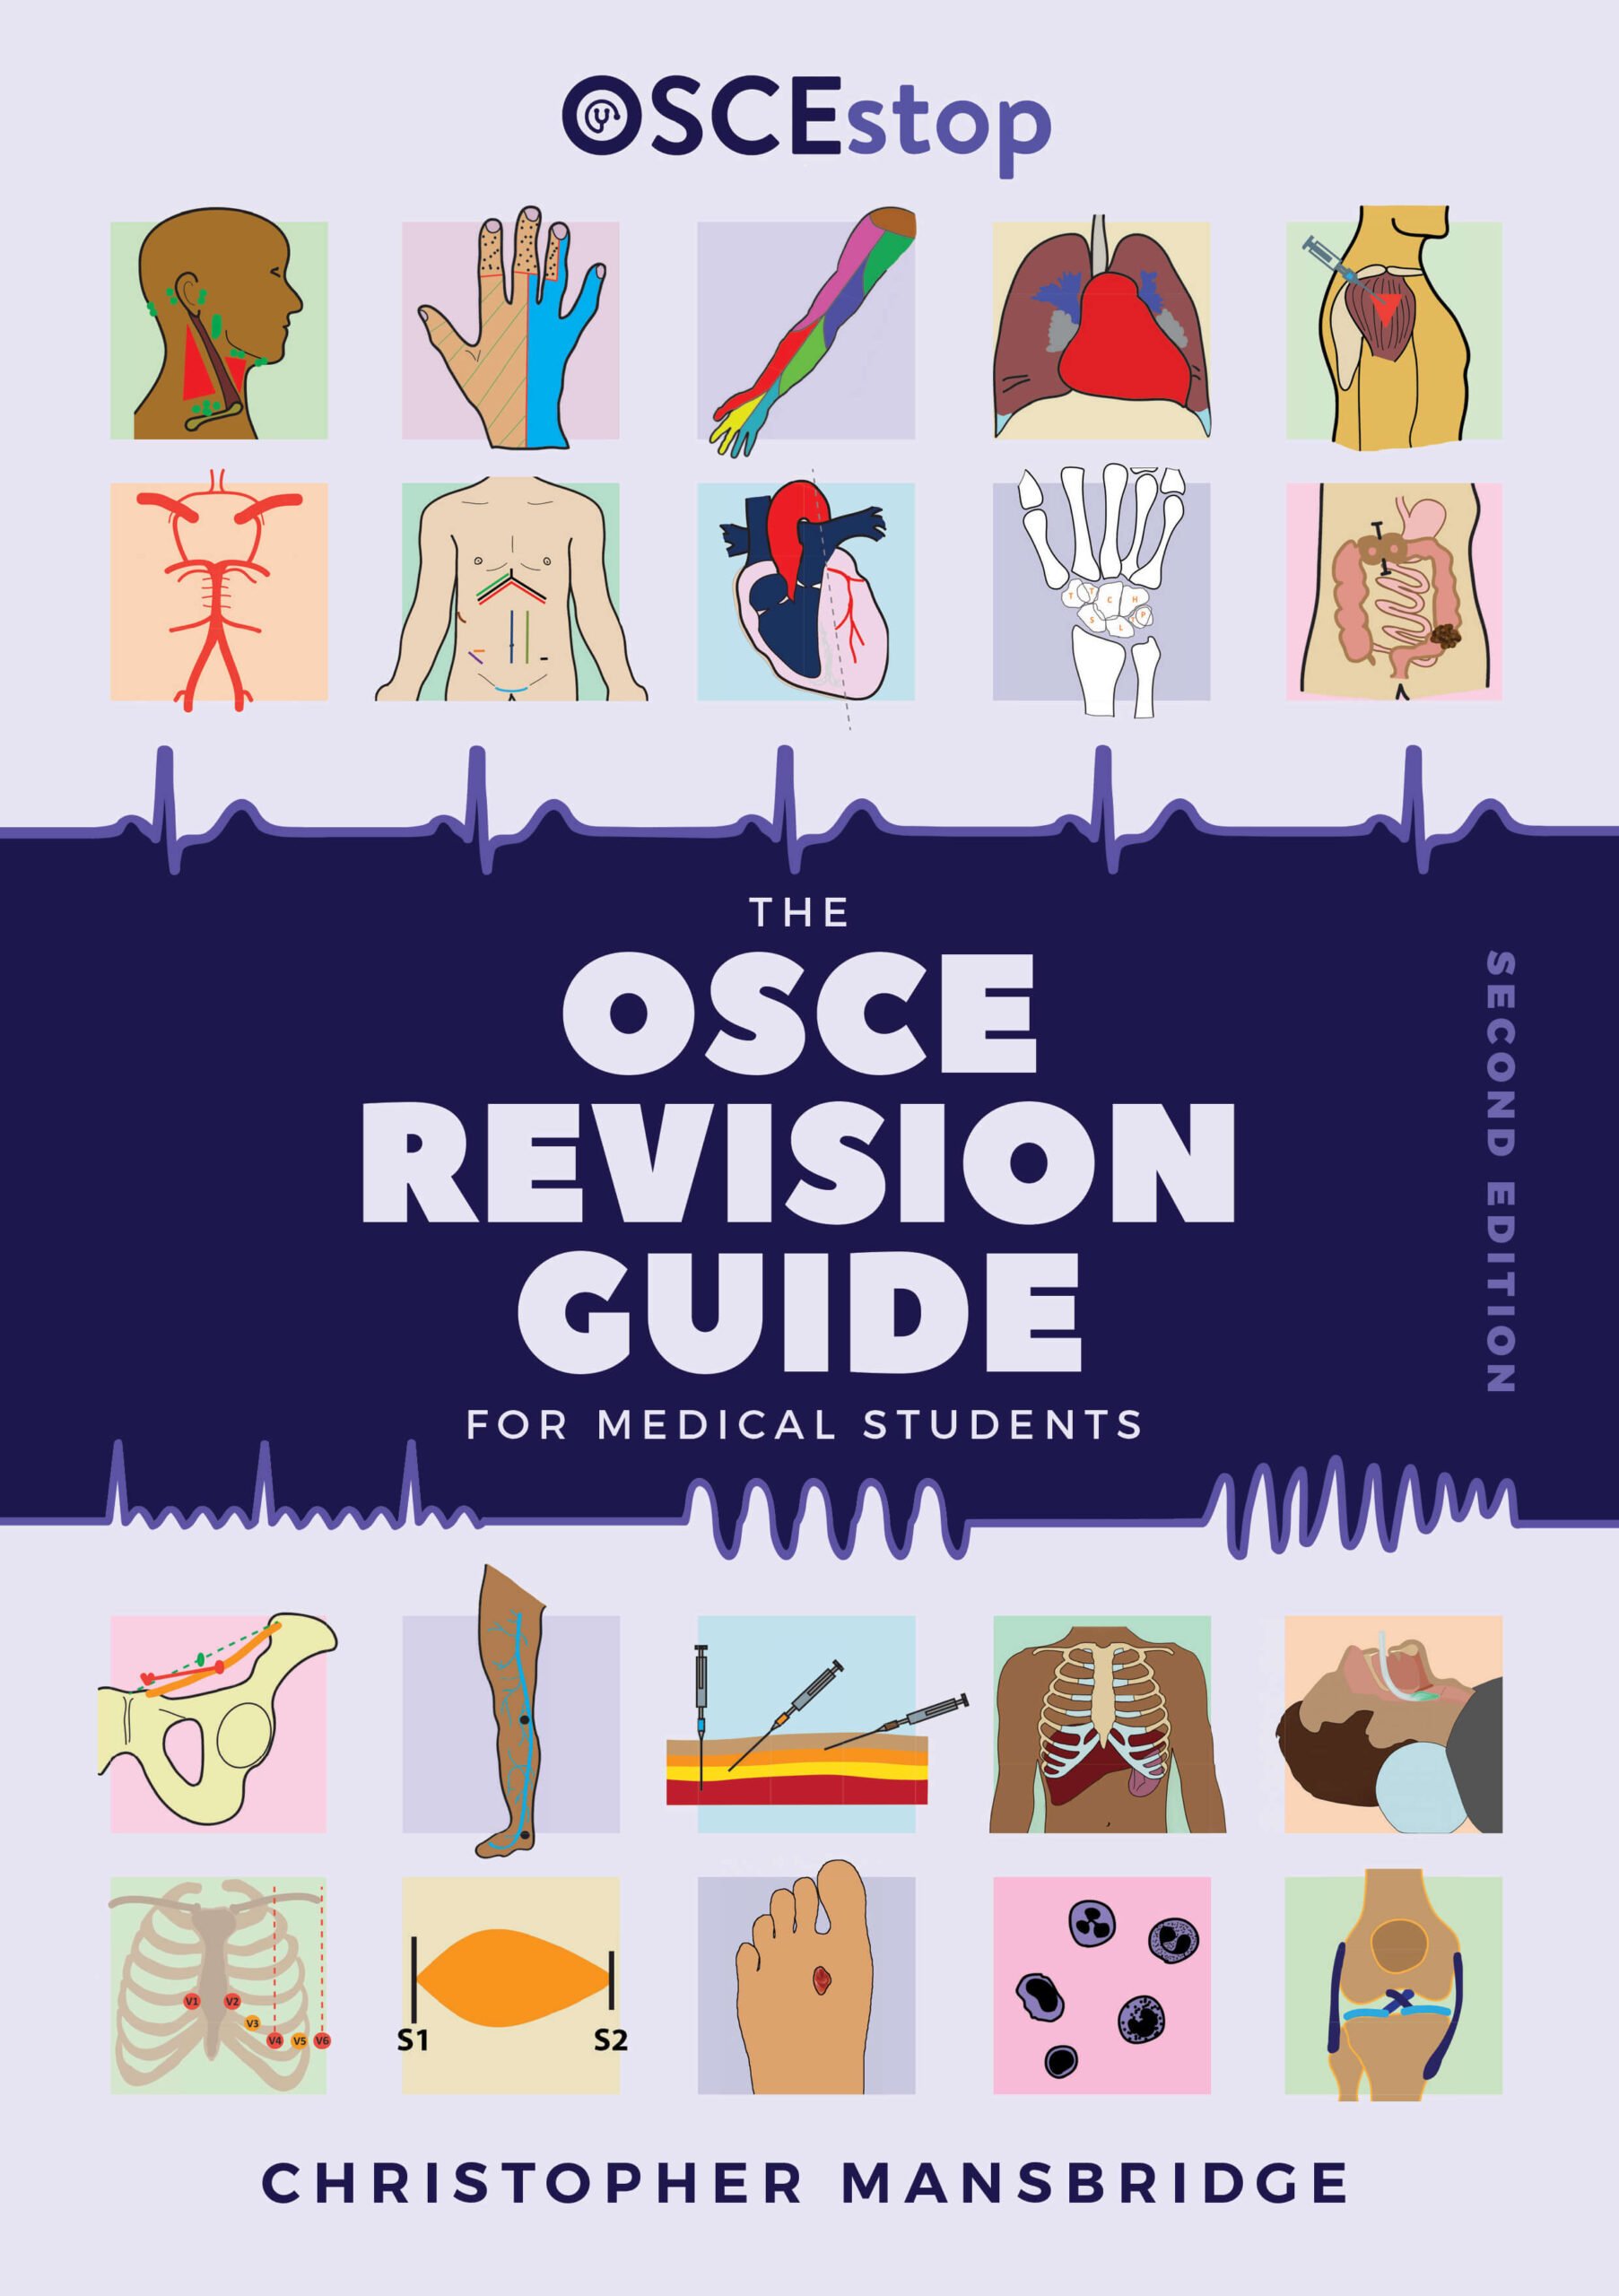 OSCE book for Medical Students